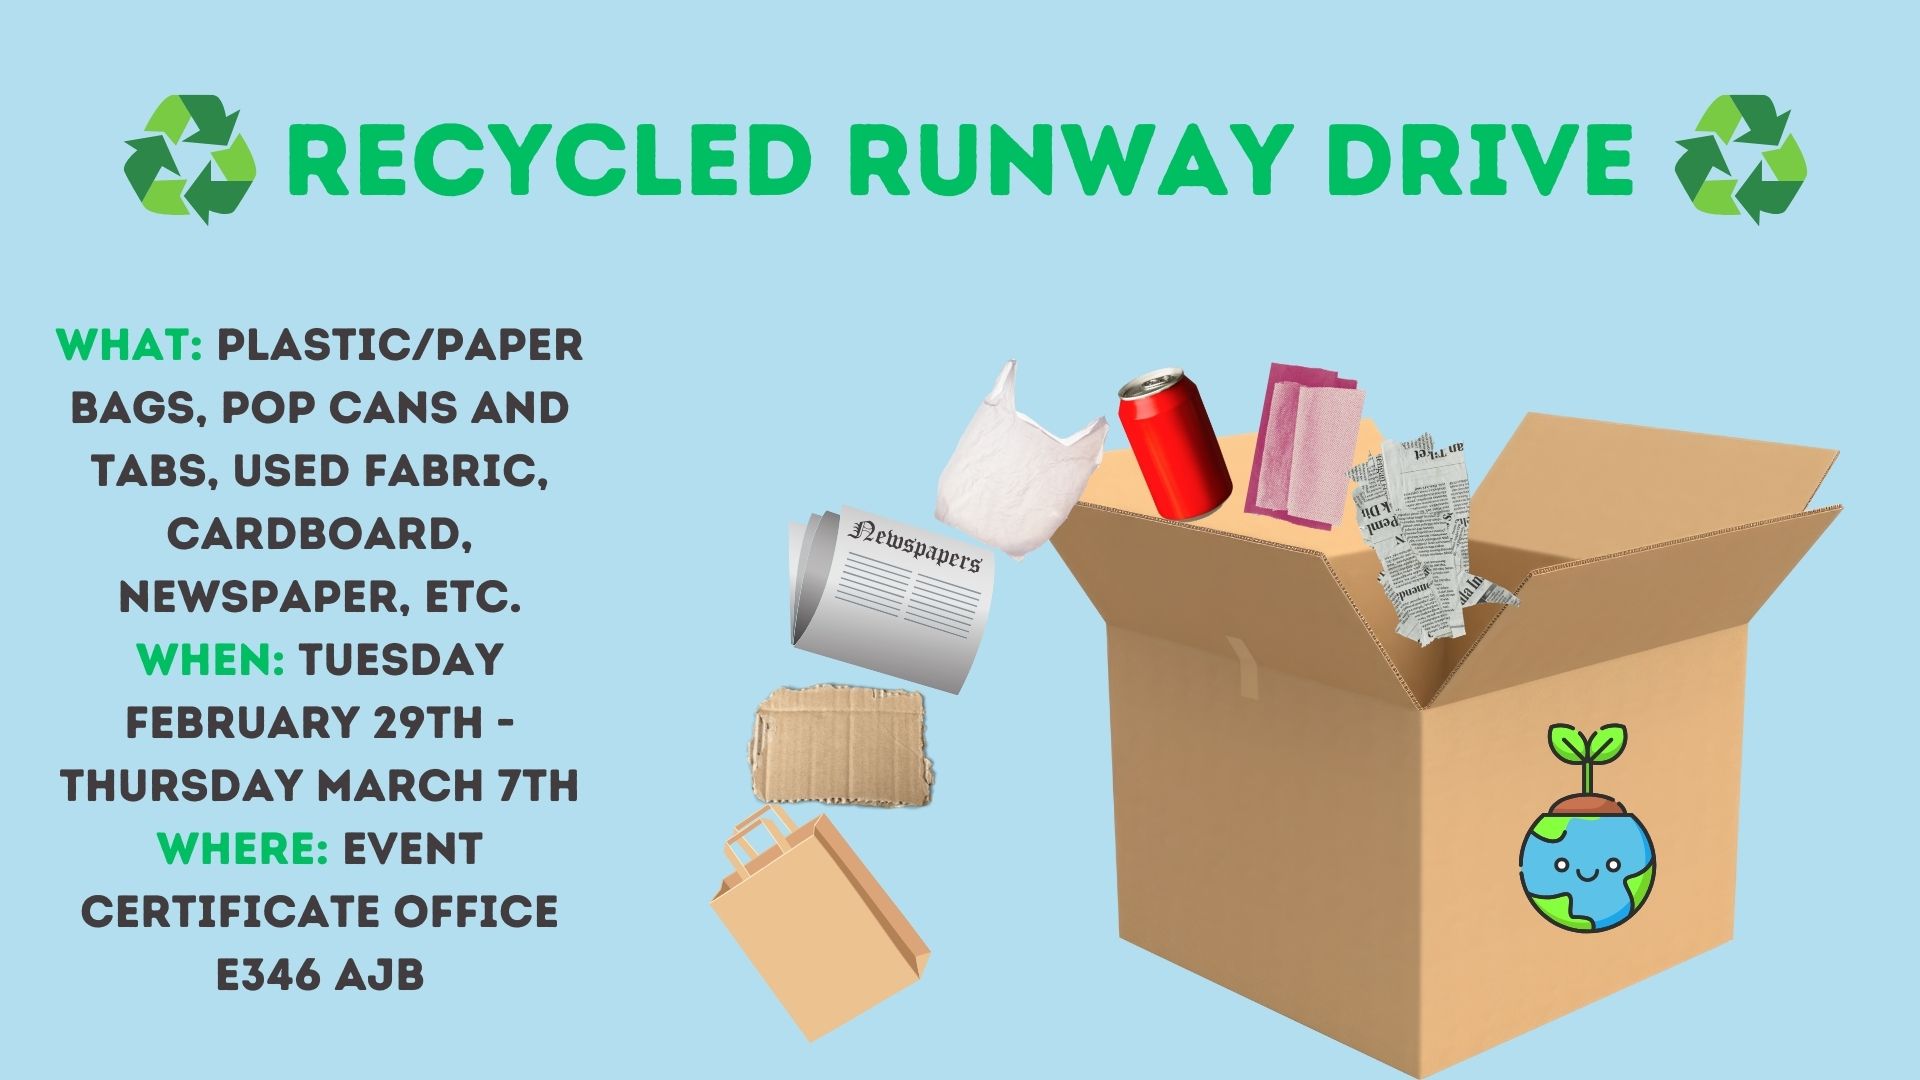 Recycled Runway Drive